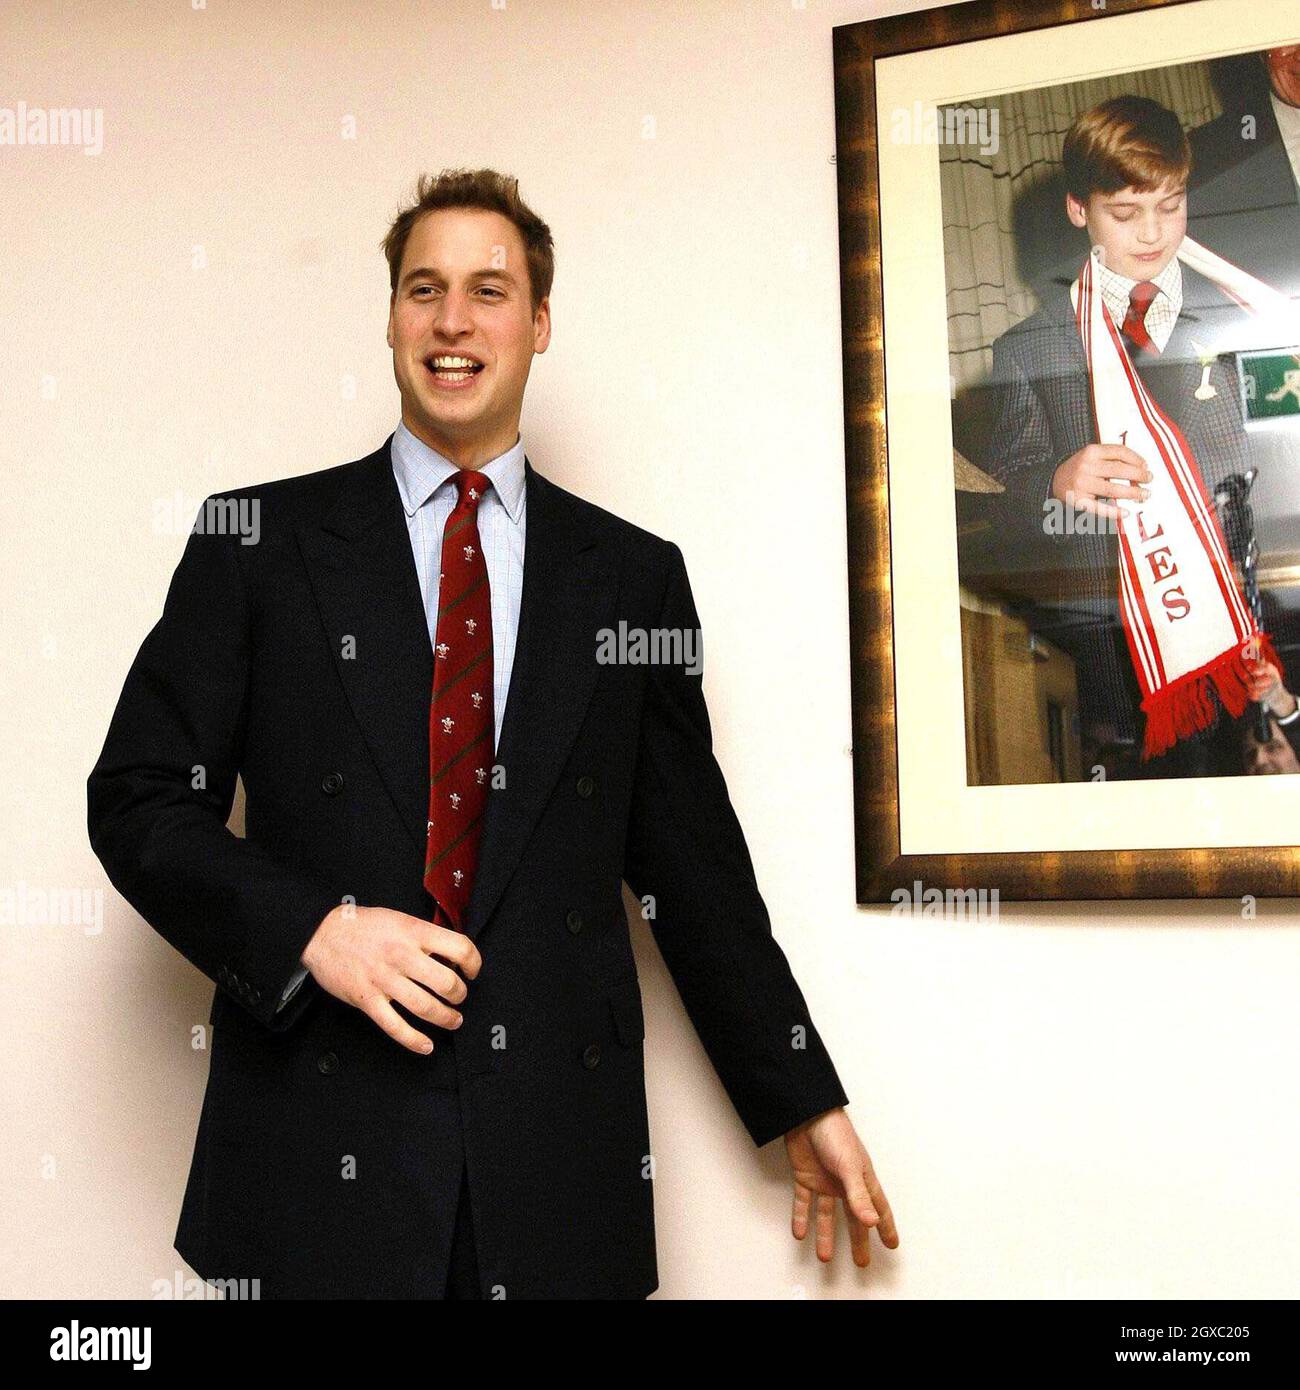 Prince William stands beside a picture of himself as a boy at the Millennium Stadium, Cardiff on February 4, 2007. Prince William officially took up his role as Vice Royal Patron of the Welsh Rugby Union. The prince was at the Millennium Stadium in Cardiff to see Wales play Ireland in their opening game of the Six Nations tournament. Anwar Hussein/EMPICS Entertainment Stock Photo